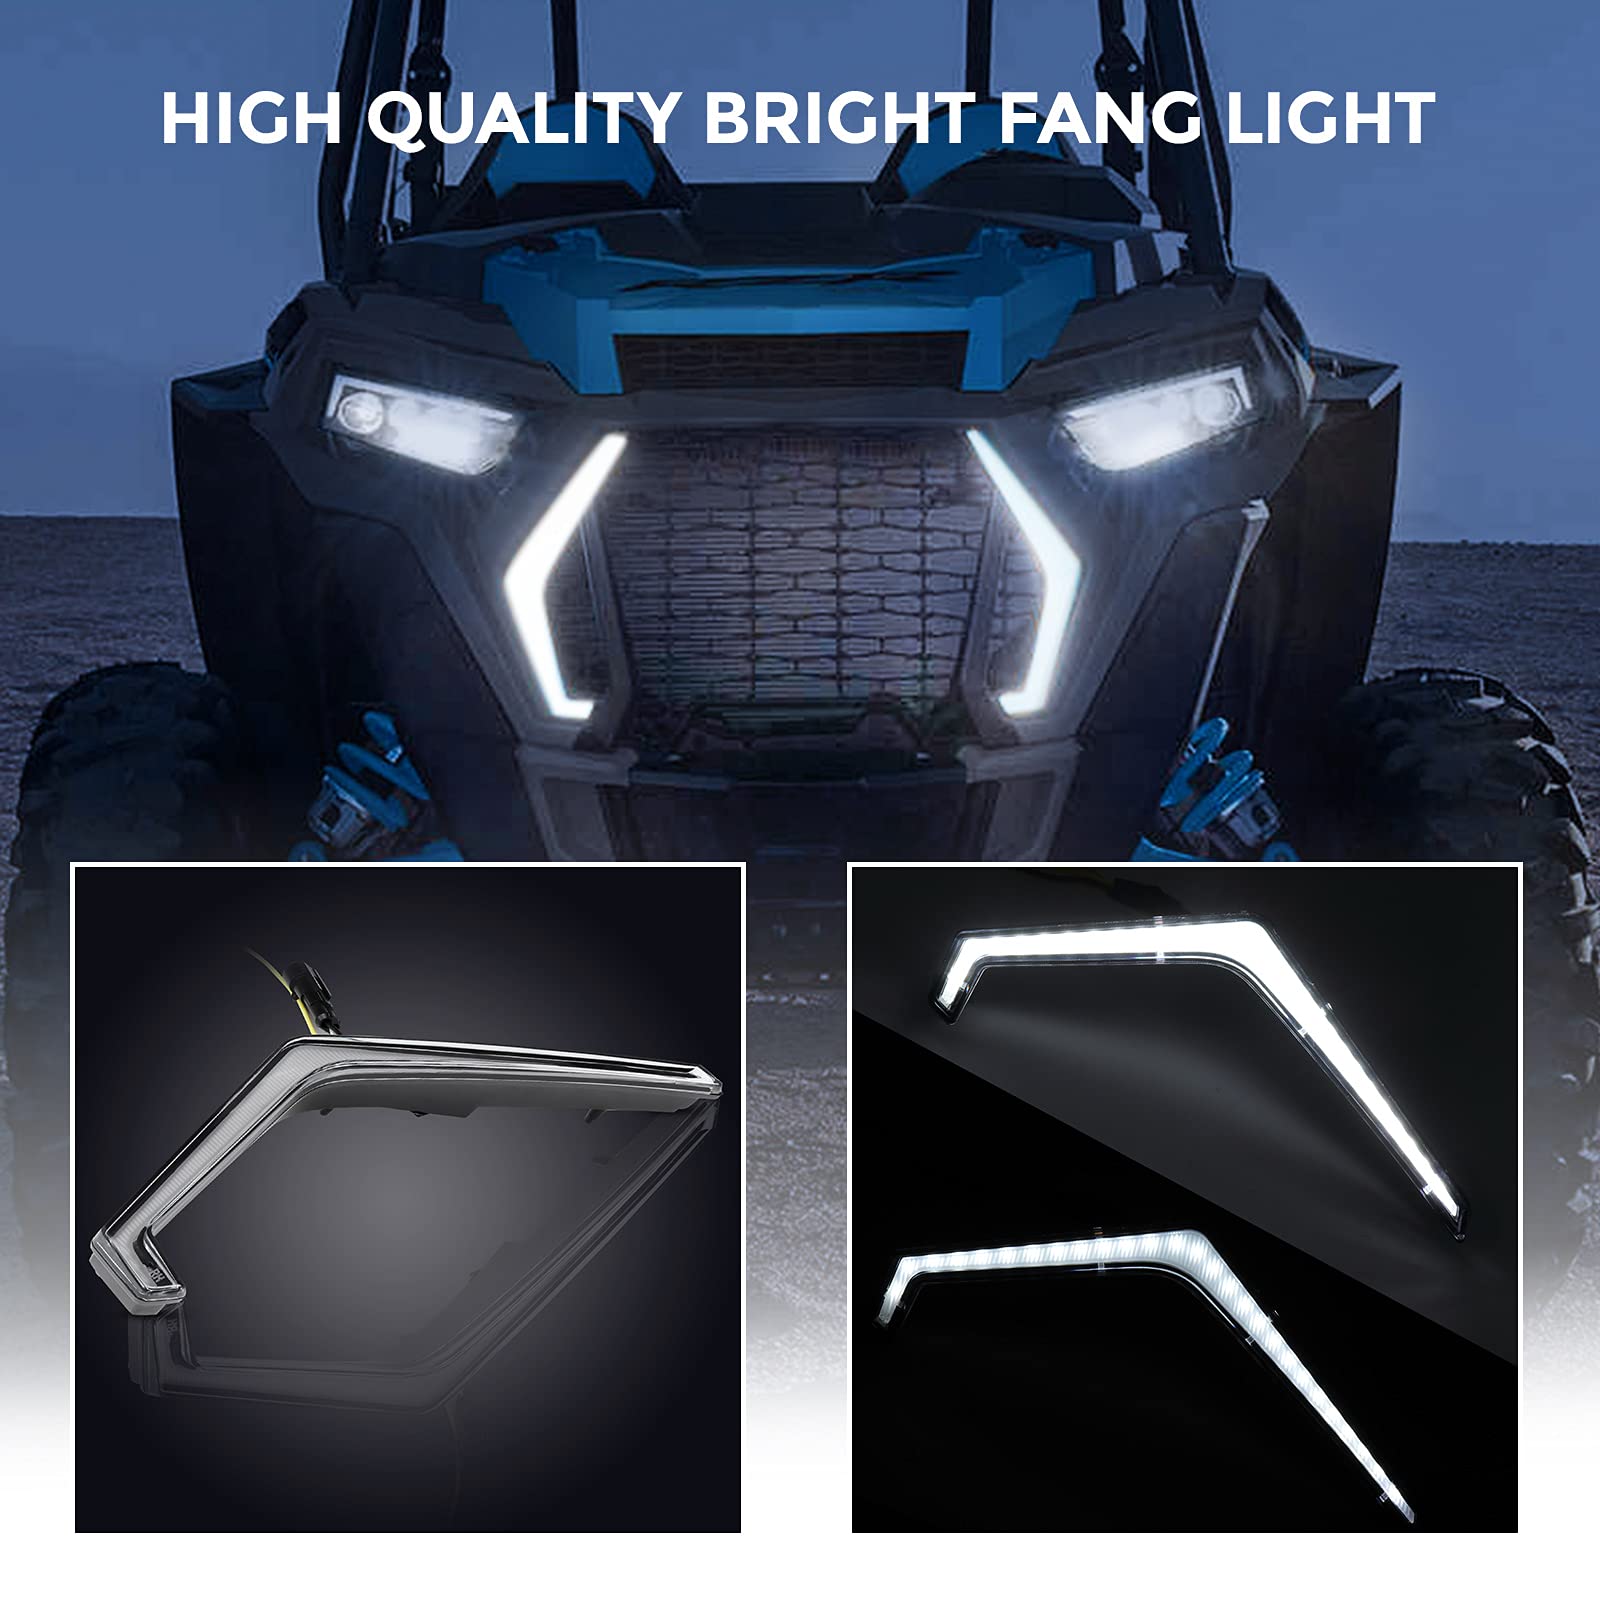 kemimoto Turn Signal Fang Lights, IP67 LED Fang Acccent Street Legal Light Front Signature Assembly Compatible with 2019 2020 2021 2022 2023 Polaris RZR XP 1000 Turbo # 2884871 (2 pcs)